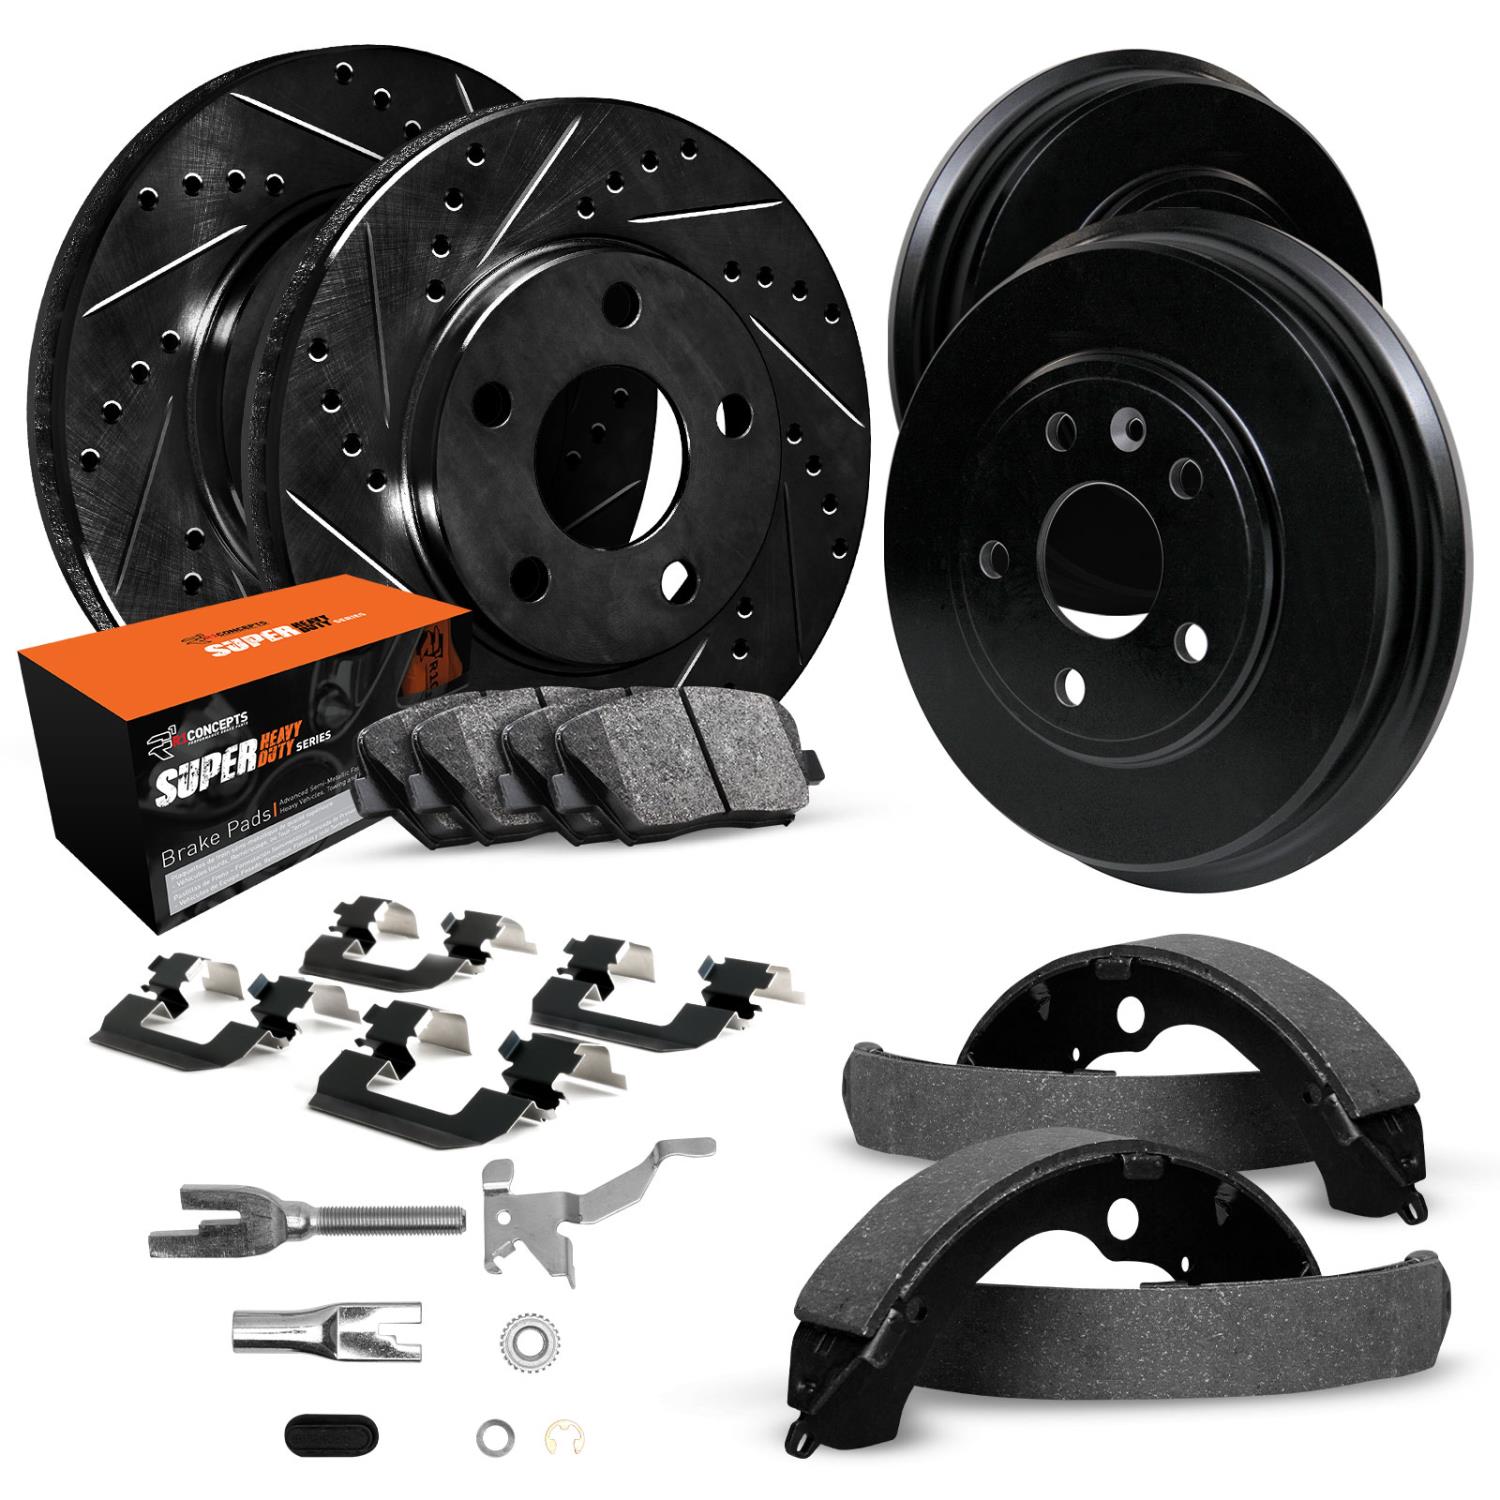 E-Line Drilled/Slotted Black Rotor & Drum Set w/Super-Duty Pads, Shoes, Hardware/Adjusters, 1986-1988 Ford/Lincoln/Mercury/Mazda